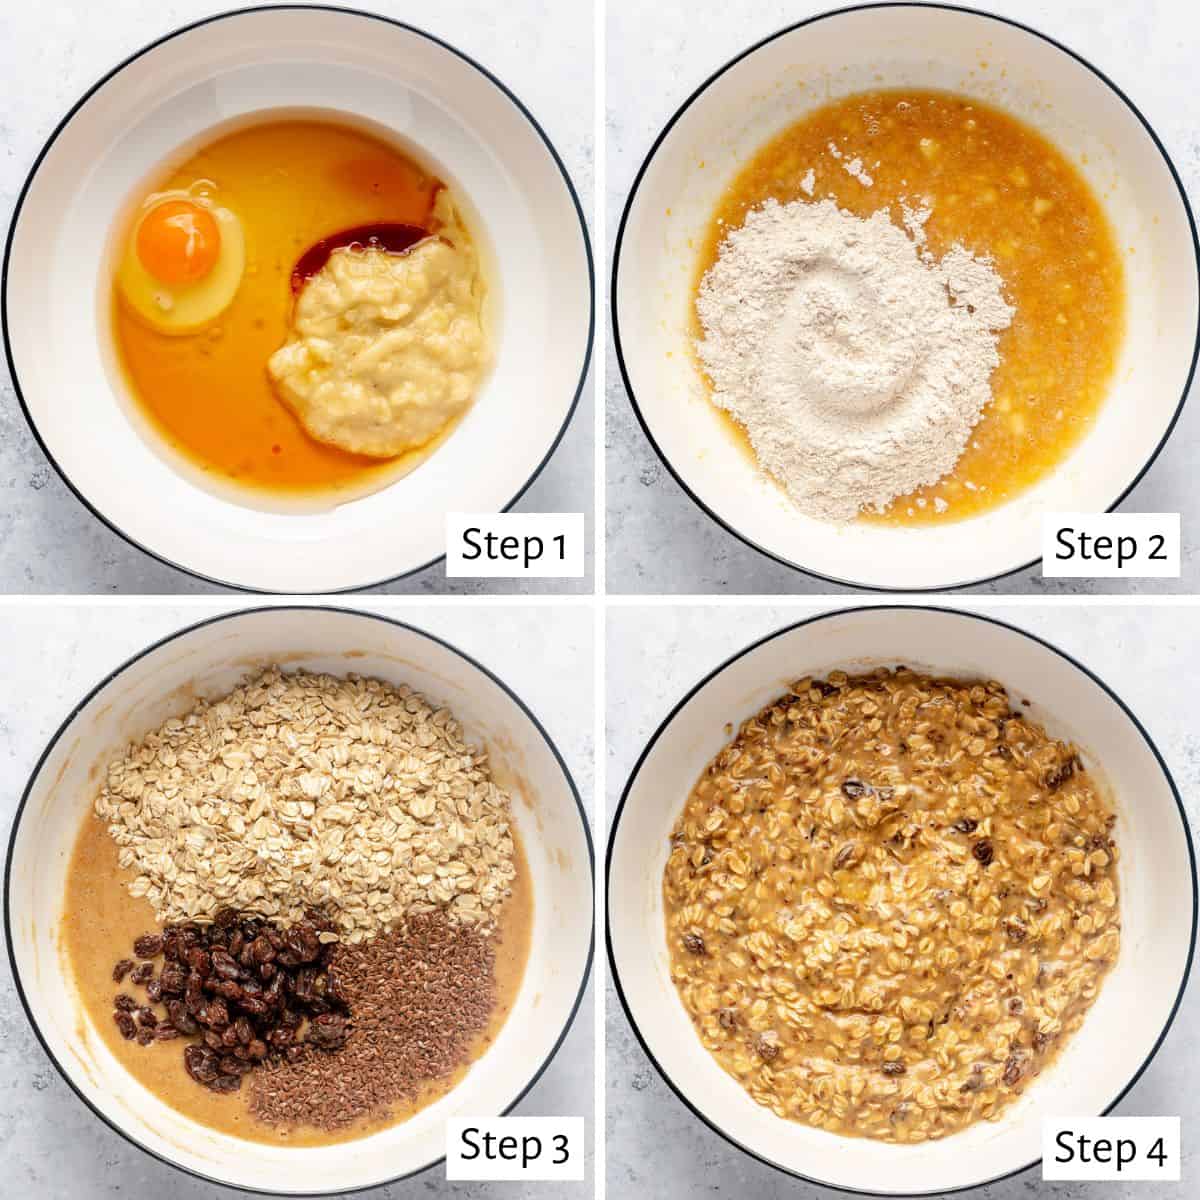 4 image collage making recipe: 1- Banana, maple syrup, oil, egg, and vanilla in a bowl before combining, 2- after wet ingredients combined, with dry flour mixture added o top, 3- after combined with oats, raisins, and flax seed added, 4- final dough.